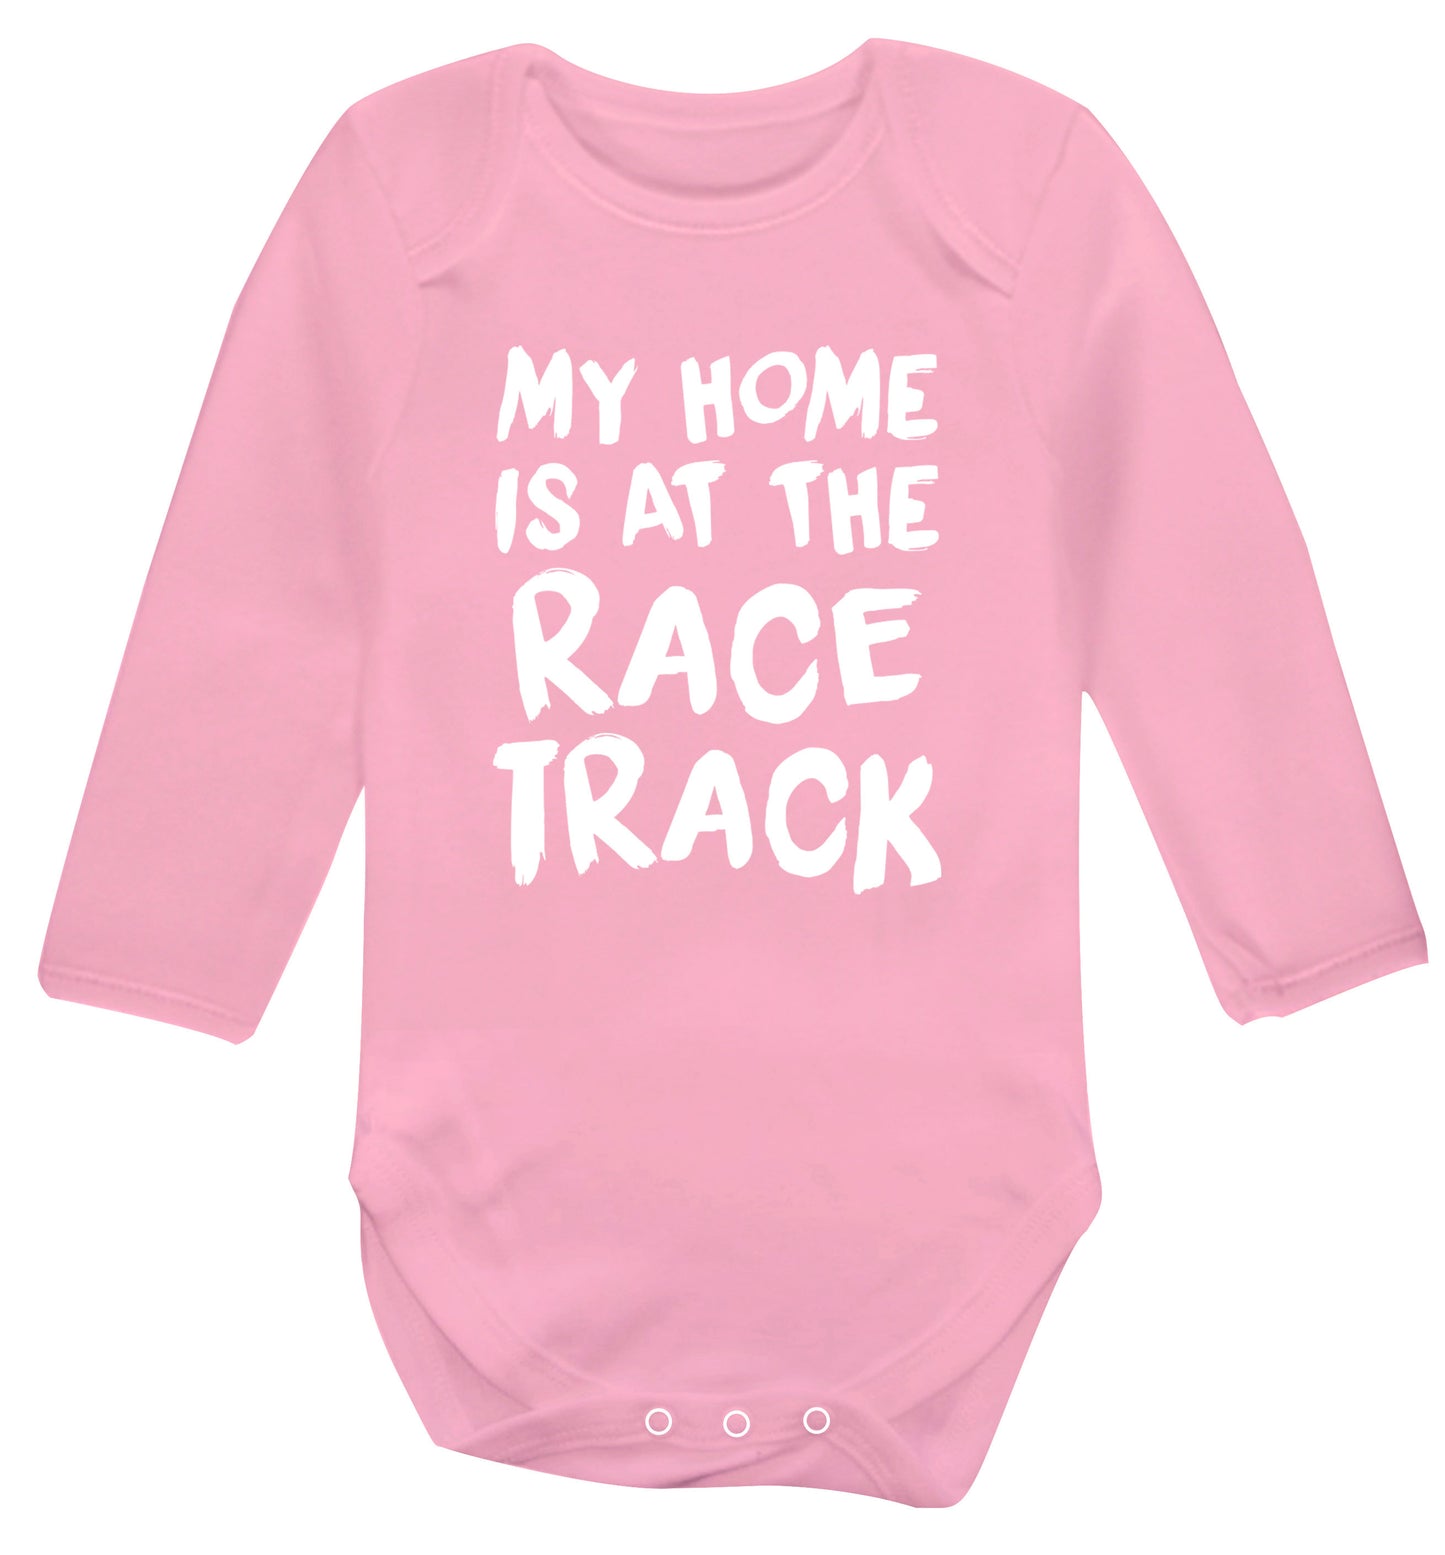 My home is at the race track Baby Vest long sleeved pale pink 6-12 months